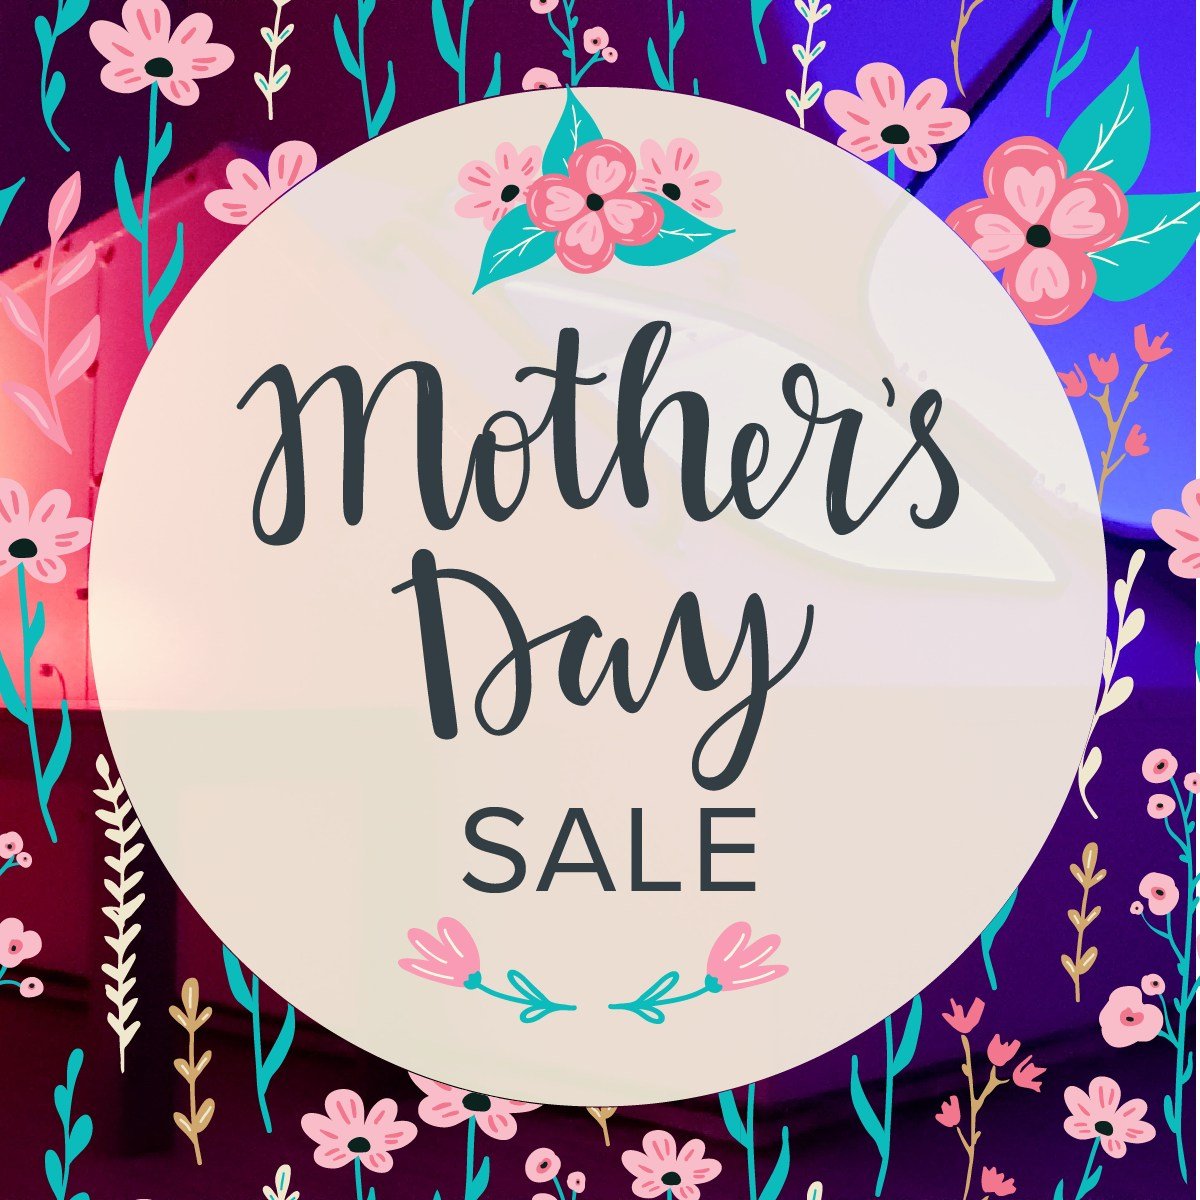 Celebrate Mother&rsquo;s Day by giving the special women in your life something they&rsquo;ll truly cherish - SOME DANG QUIET. Up to 20% off this week only!